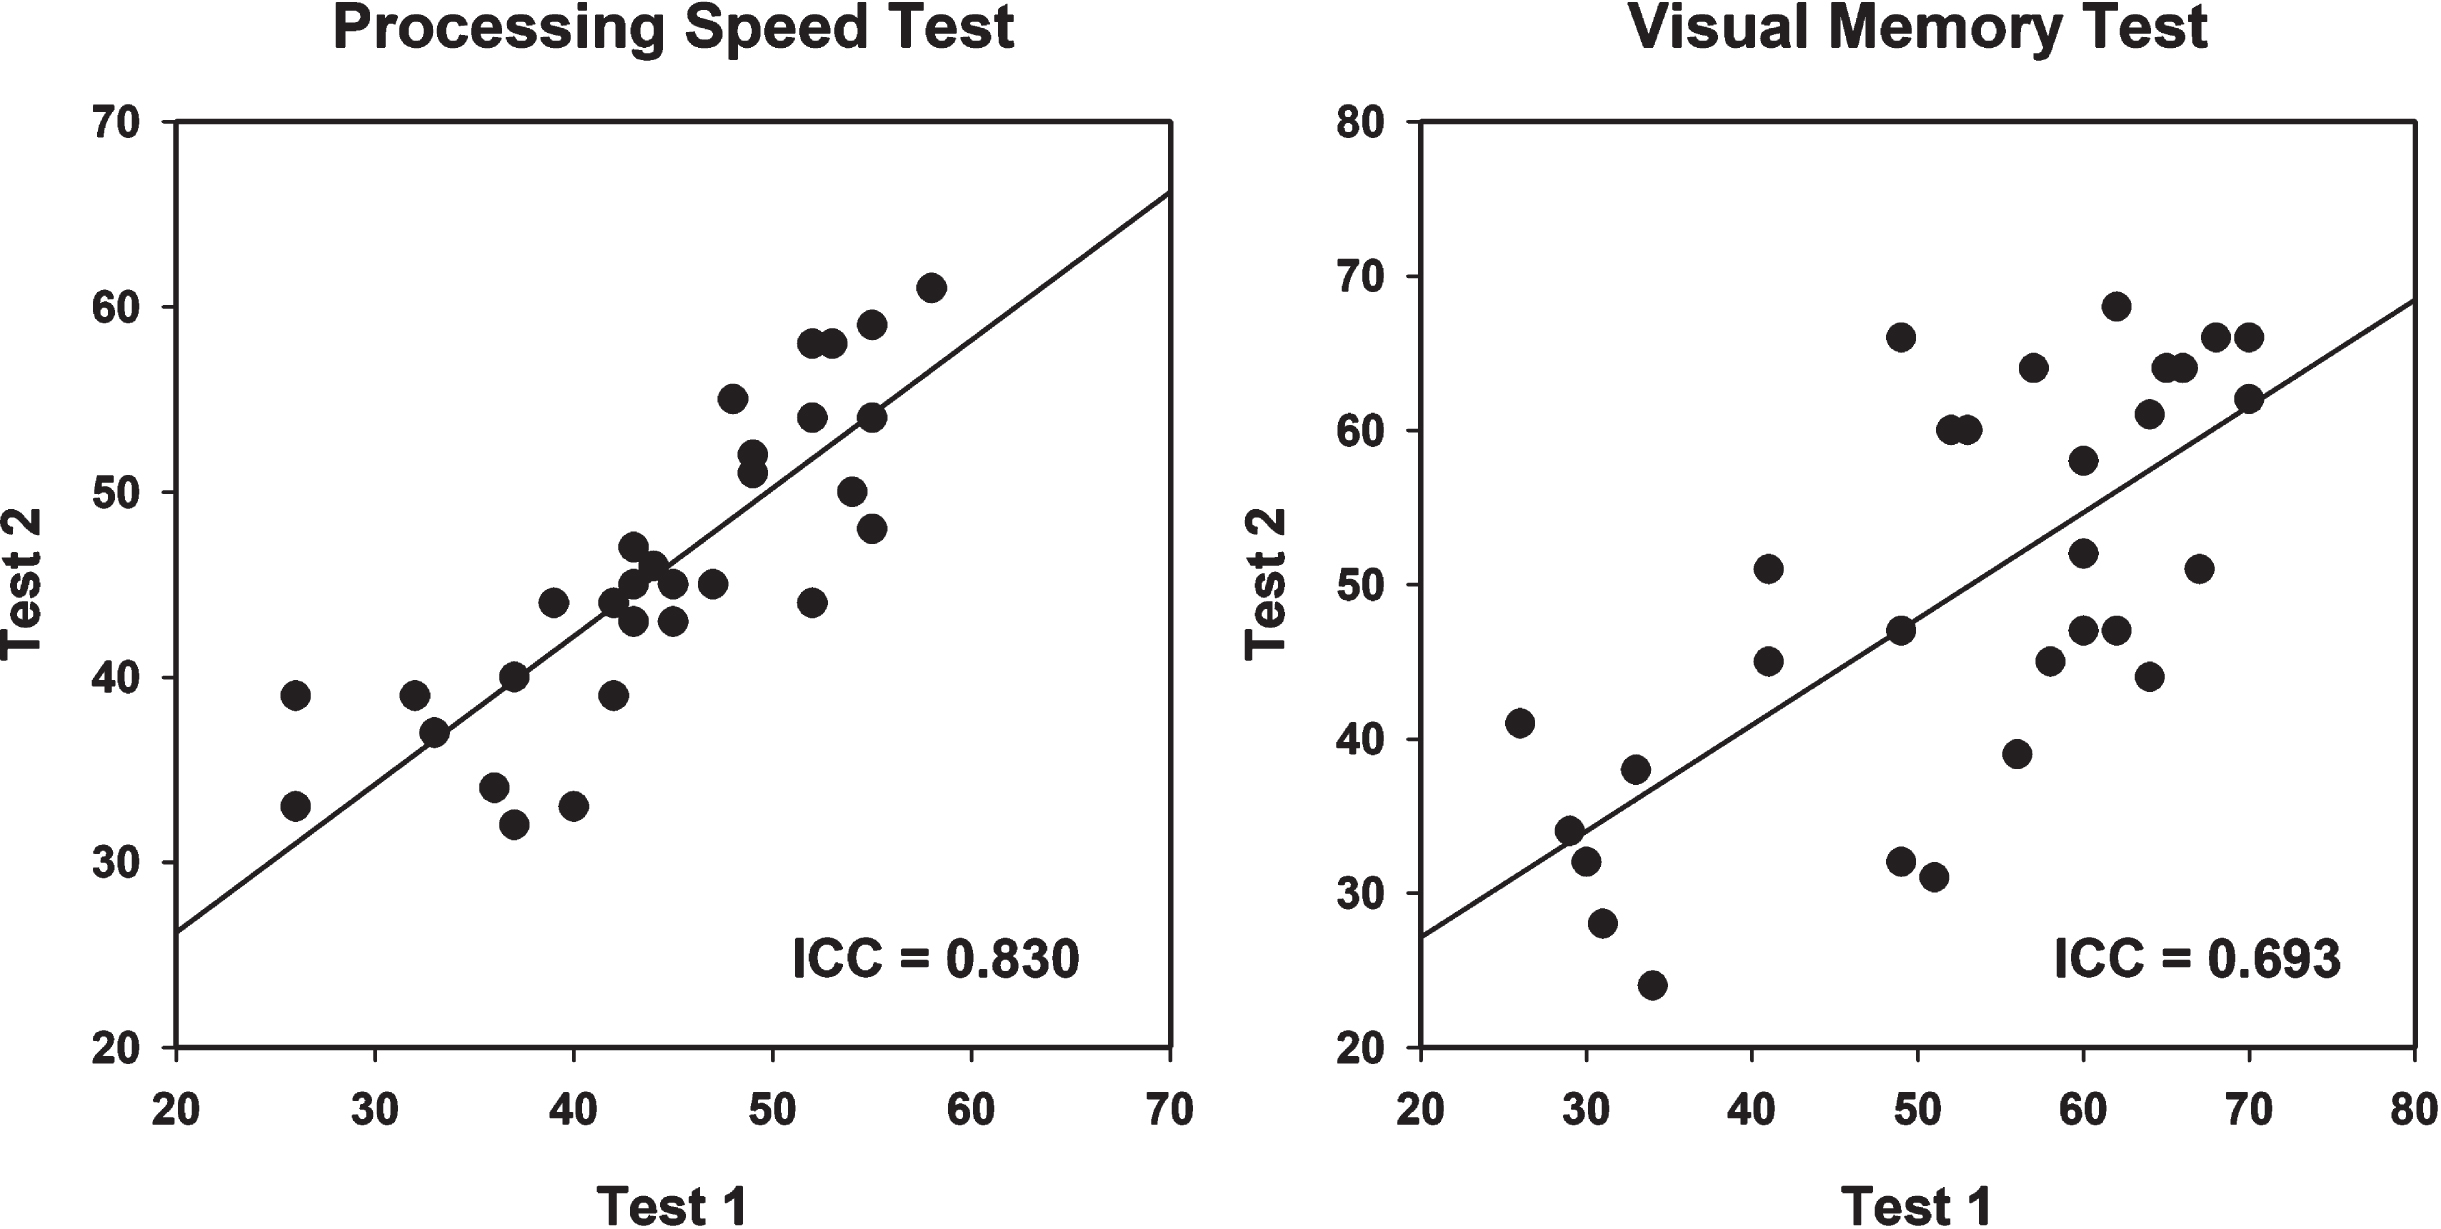 Test-retest reliability scatterplot with best fitting linear line for the Processing Speed Test and Visual Memory Test (see text for details). ICC, Intraclass Correlation.